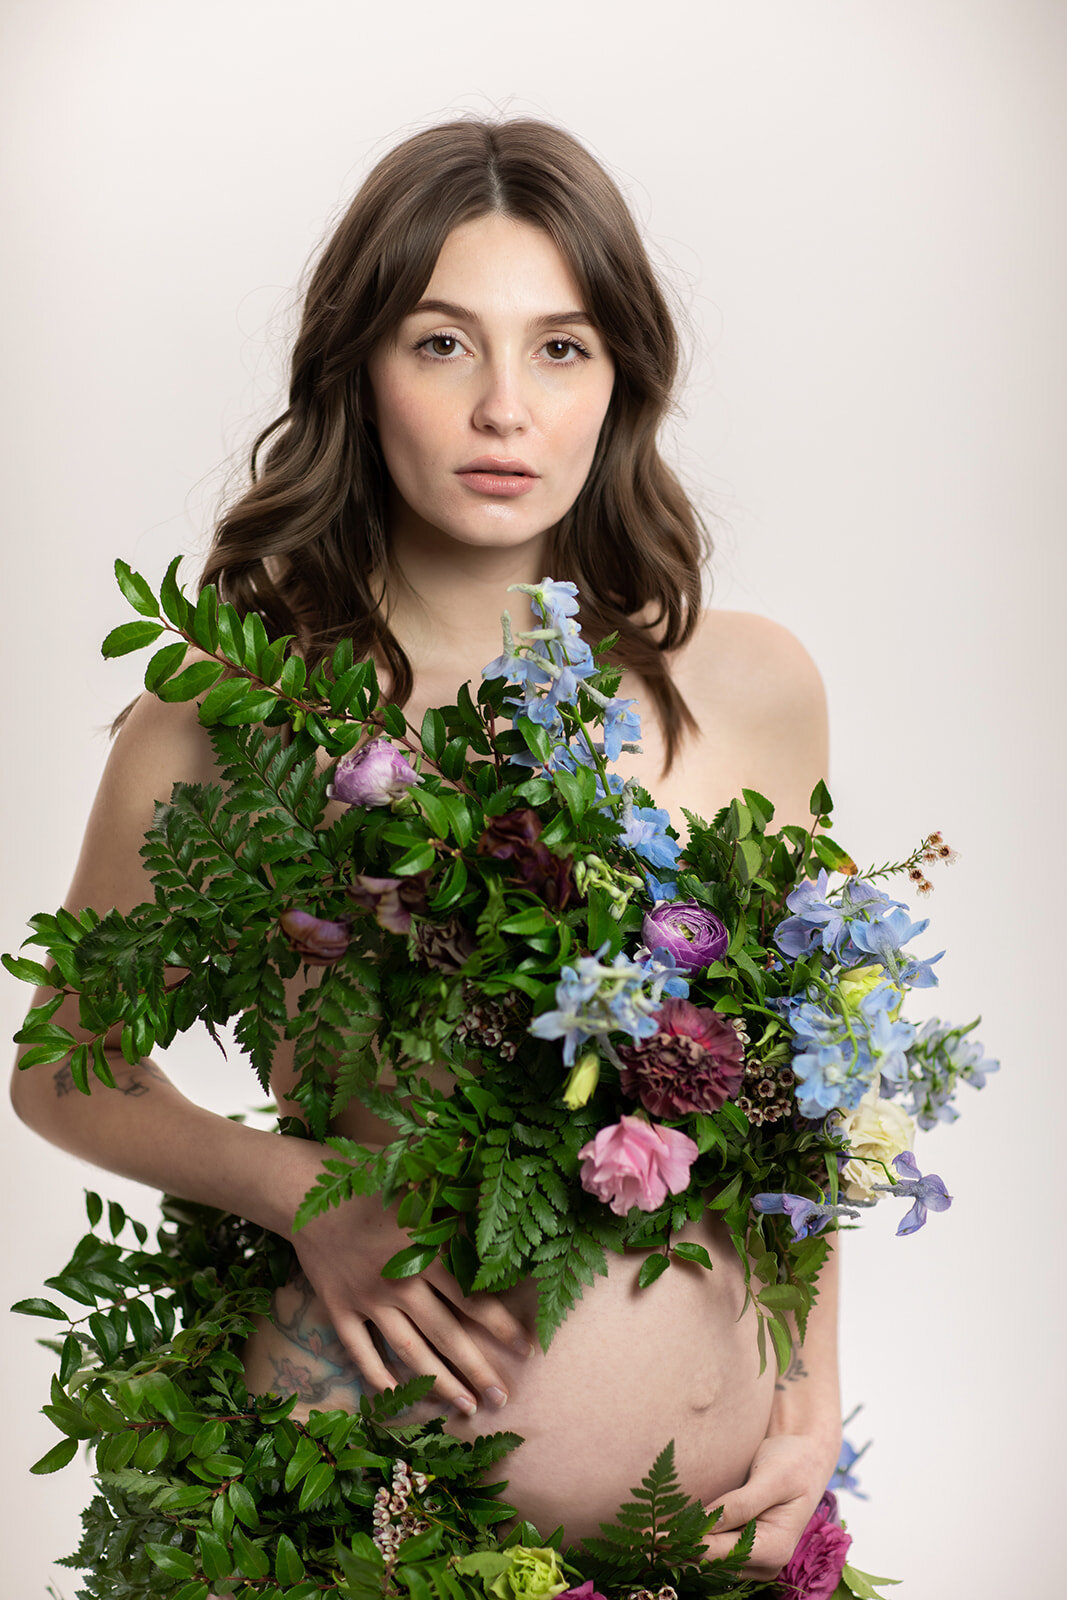 Greek inspired maternity shoot with a wearable floral garland filled with blue delphinium, lavender spray roses, plum ranunculus, blush and fuchsia roses. Designed by wedding florist Rosemary & Finch in Nashville.